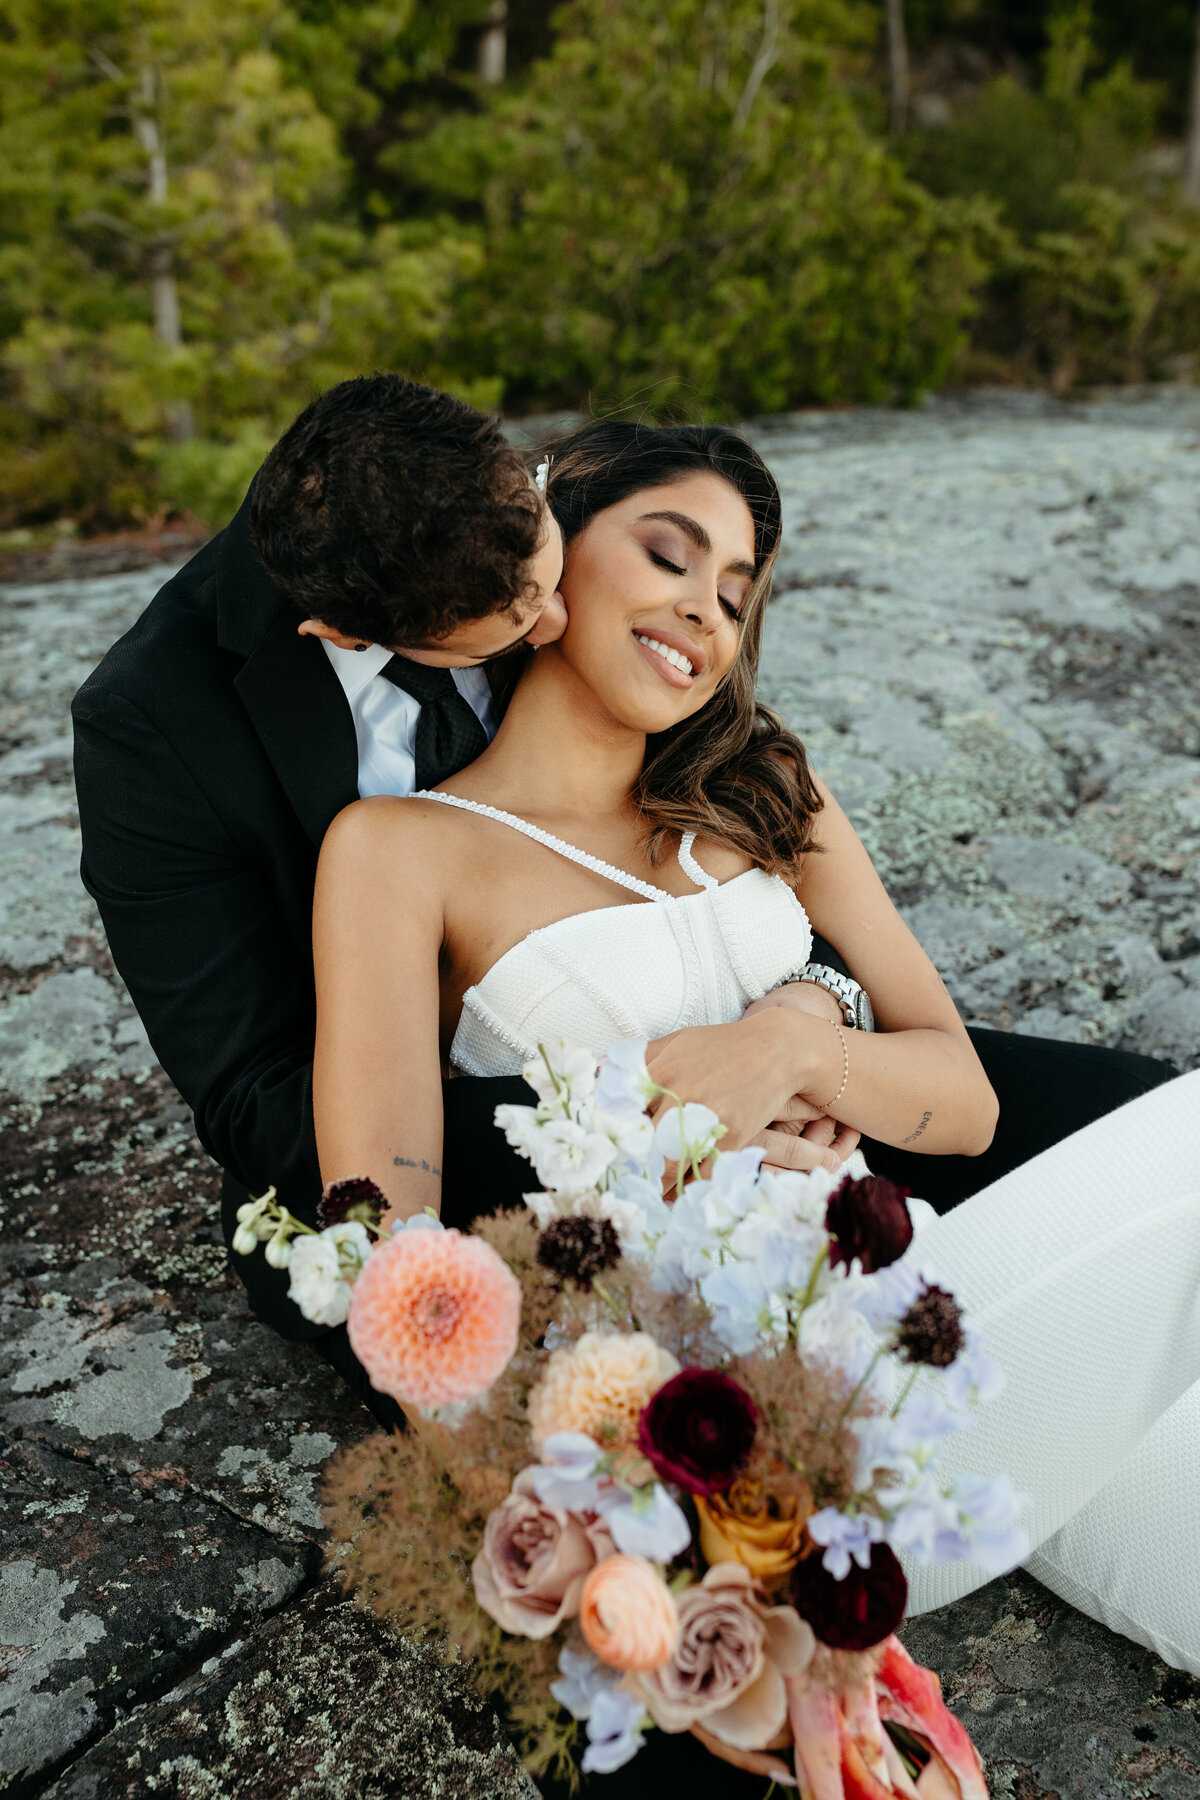 A groom kissing the bride on the cheek as they sit on a rock, with a bouquet and water in the background